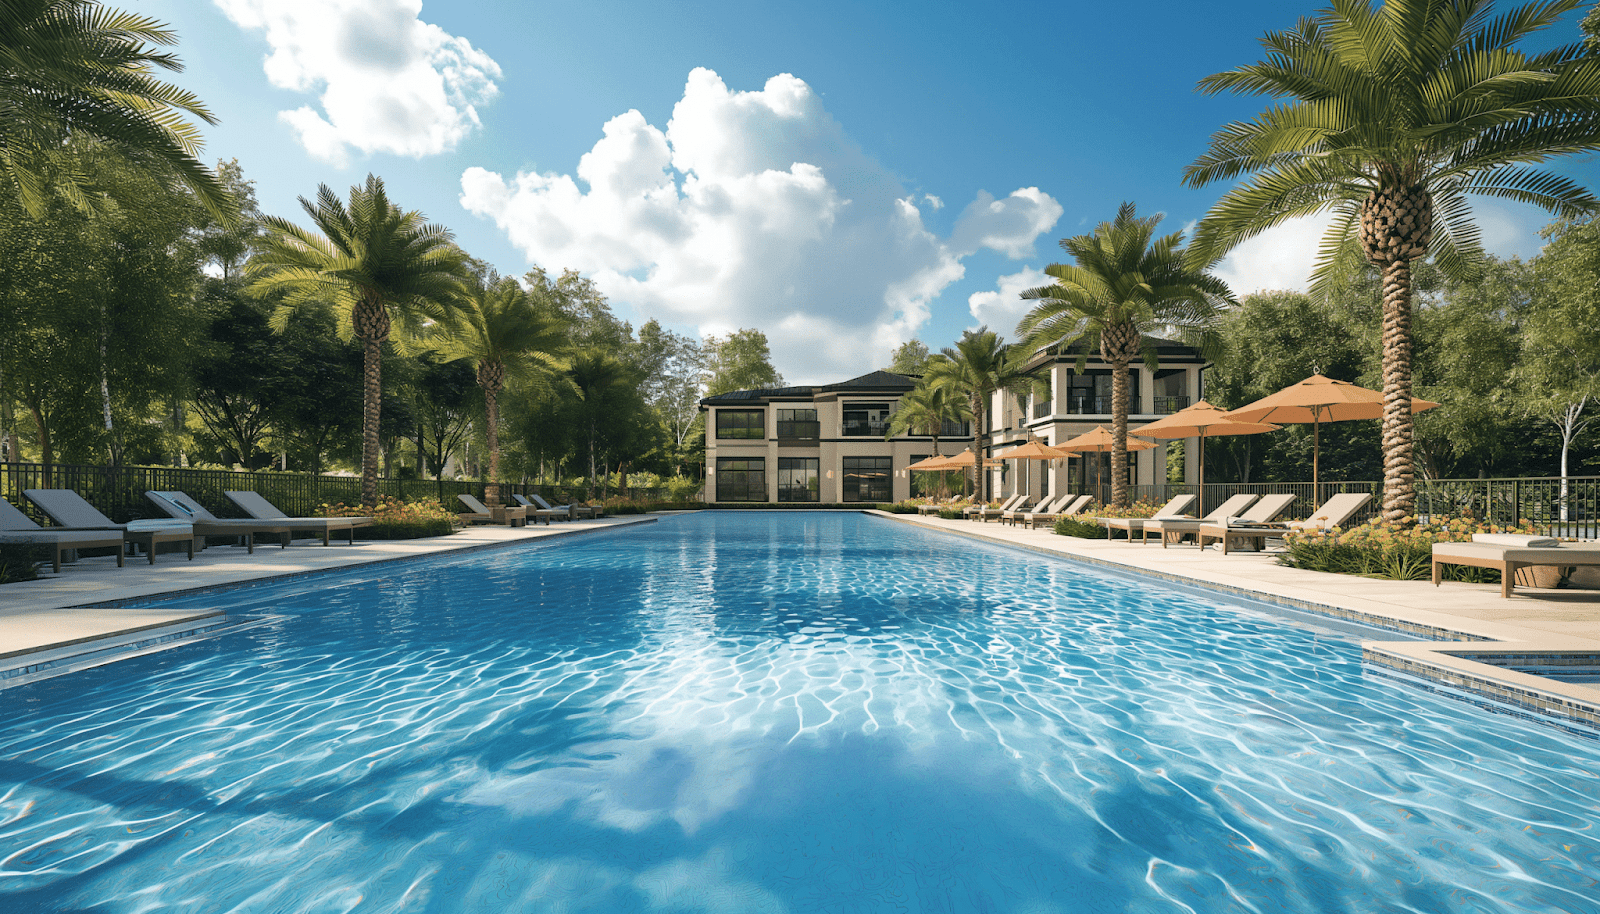 The company is a trusted name among residents and businesses in Orlando, FL, and surrounding areas, thanks to its top-notch pool resurfacing services tailored to clients’ unique needs.